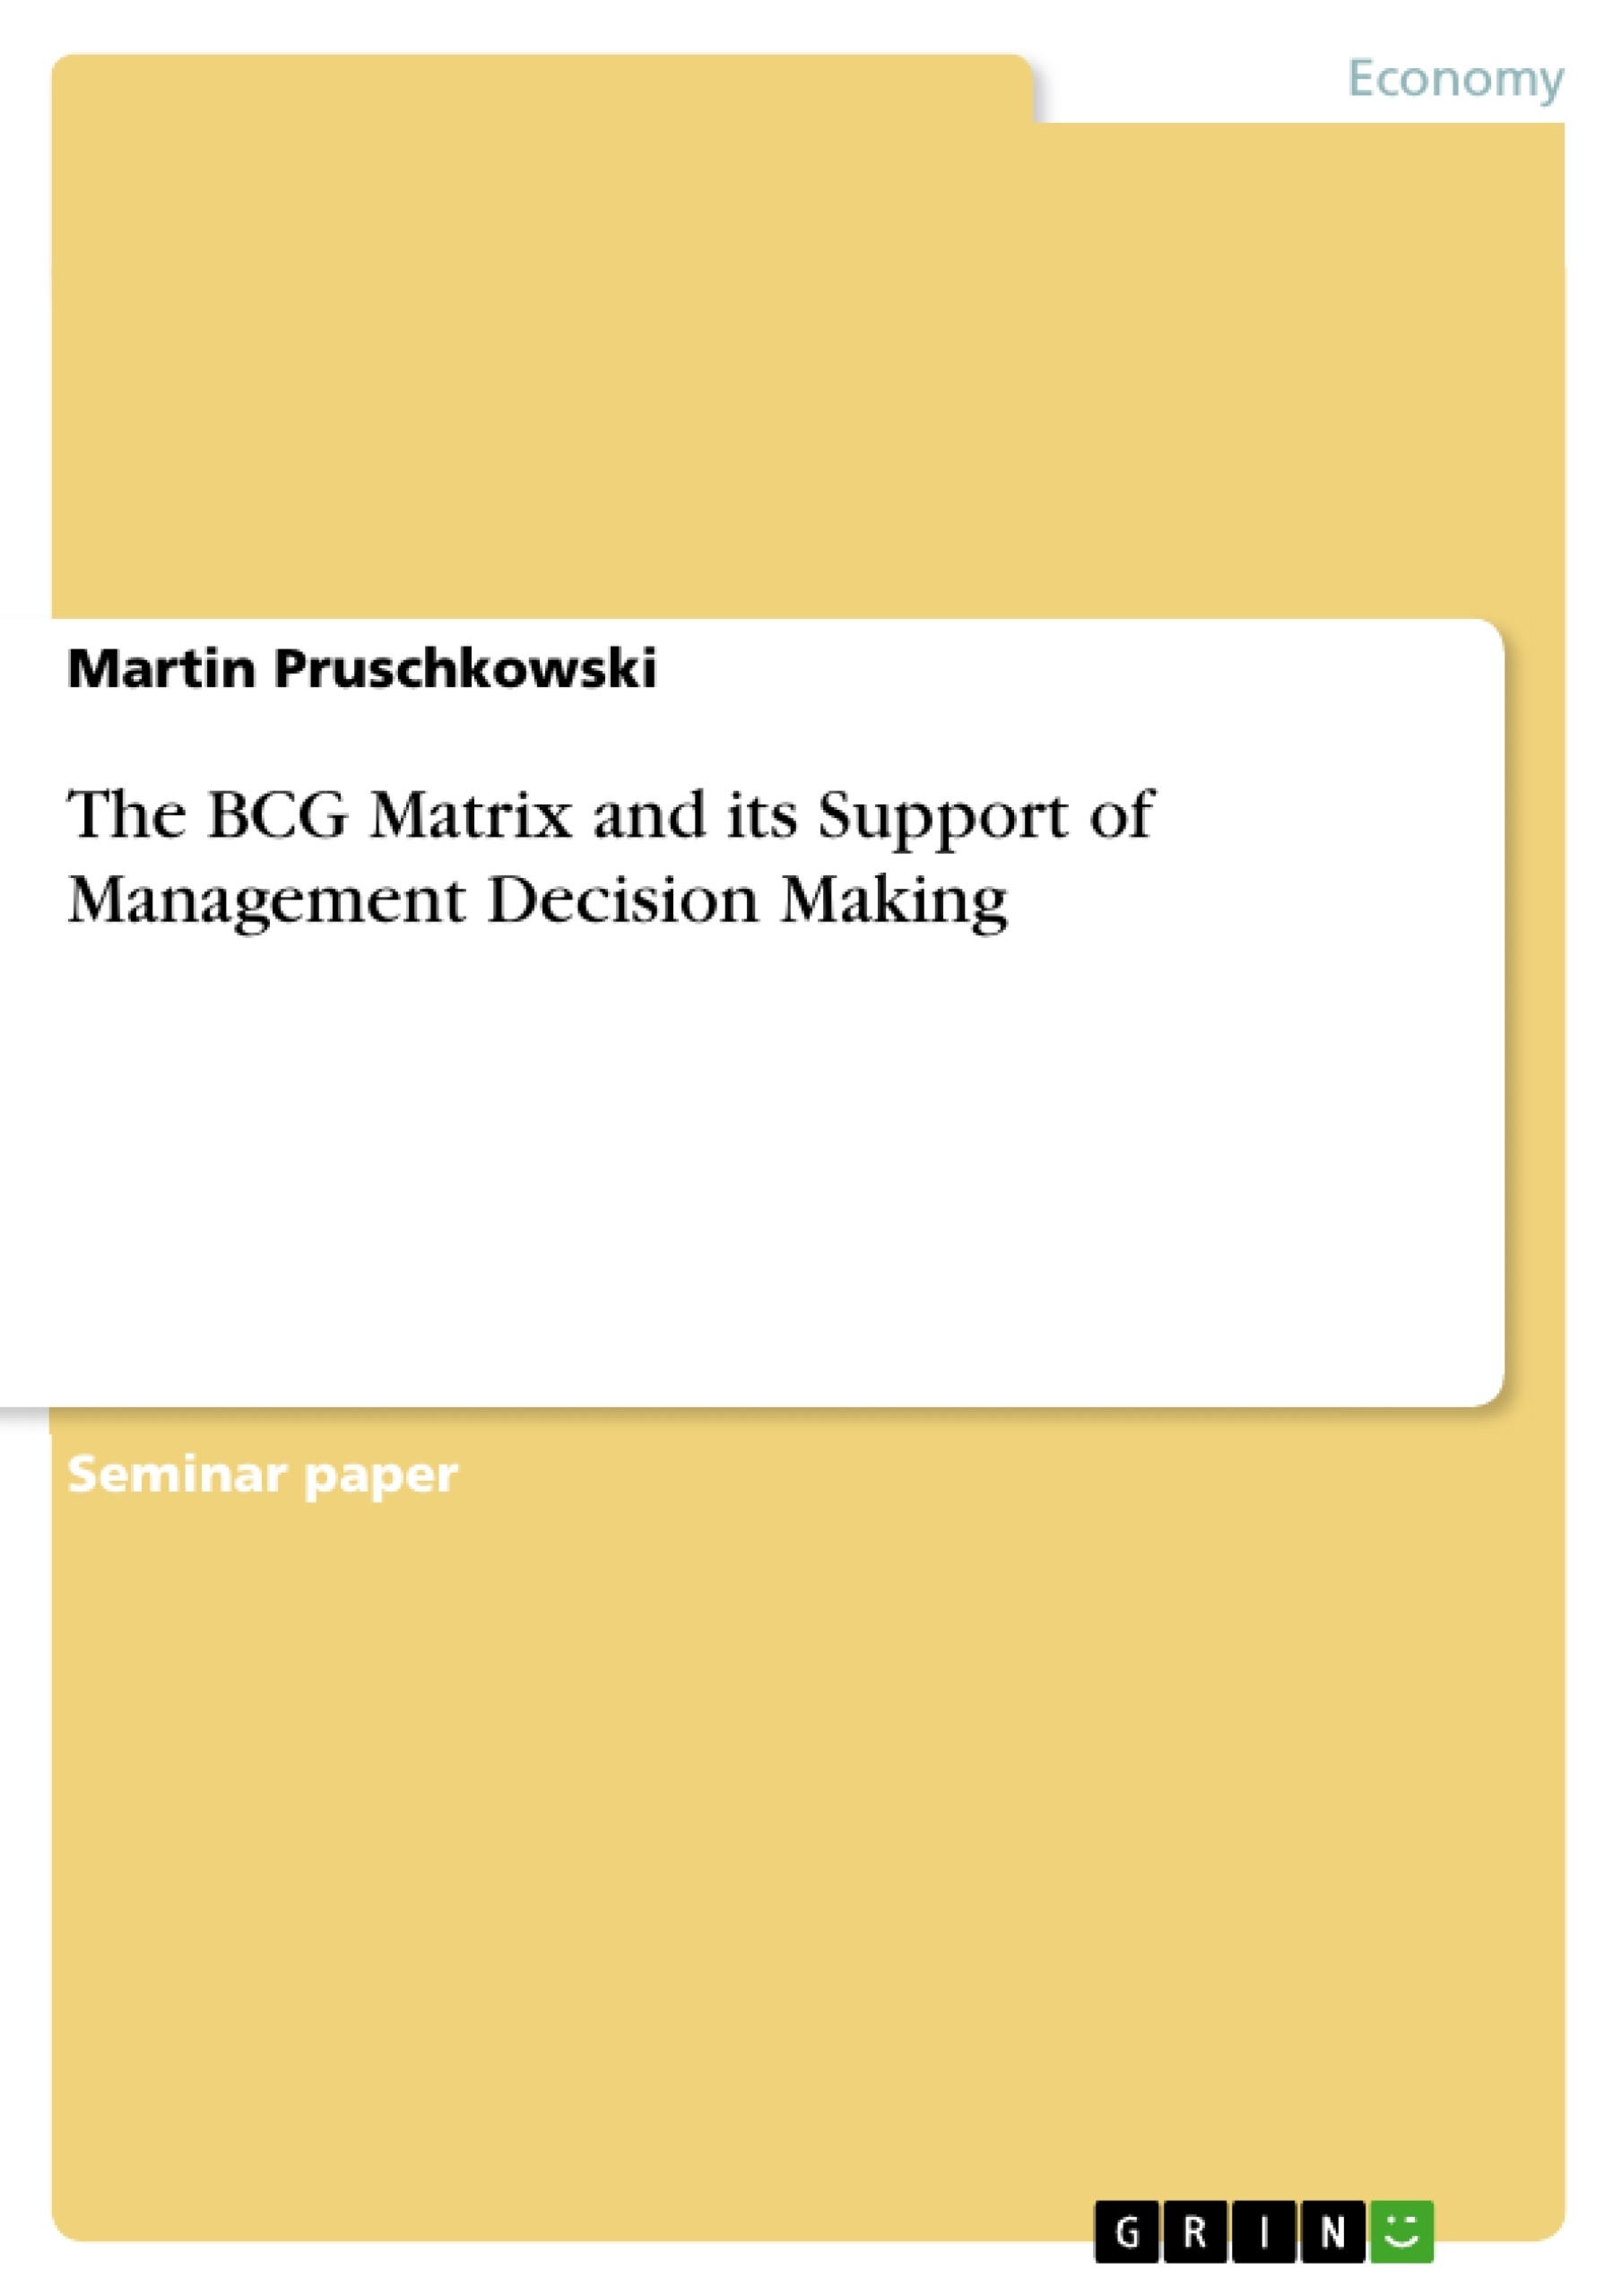 Title: The BCG Matrix and its Support of Management Decision Making